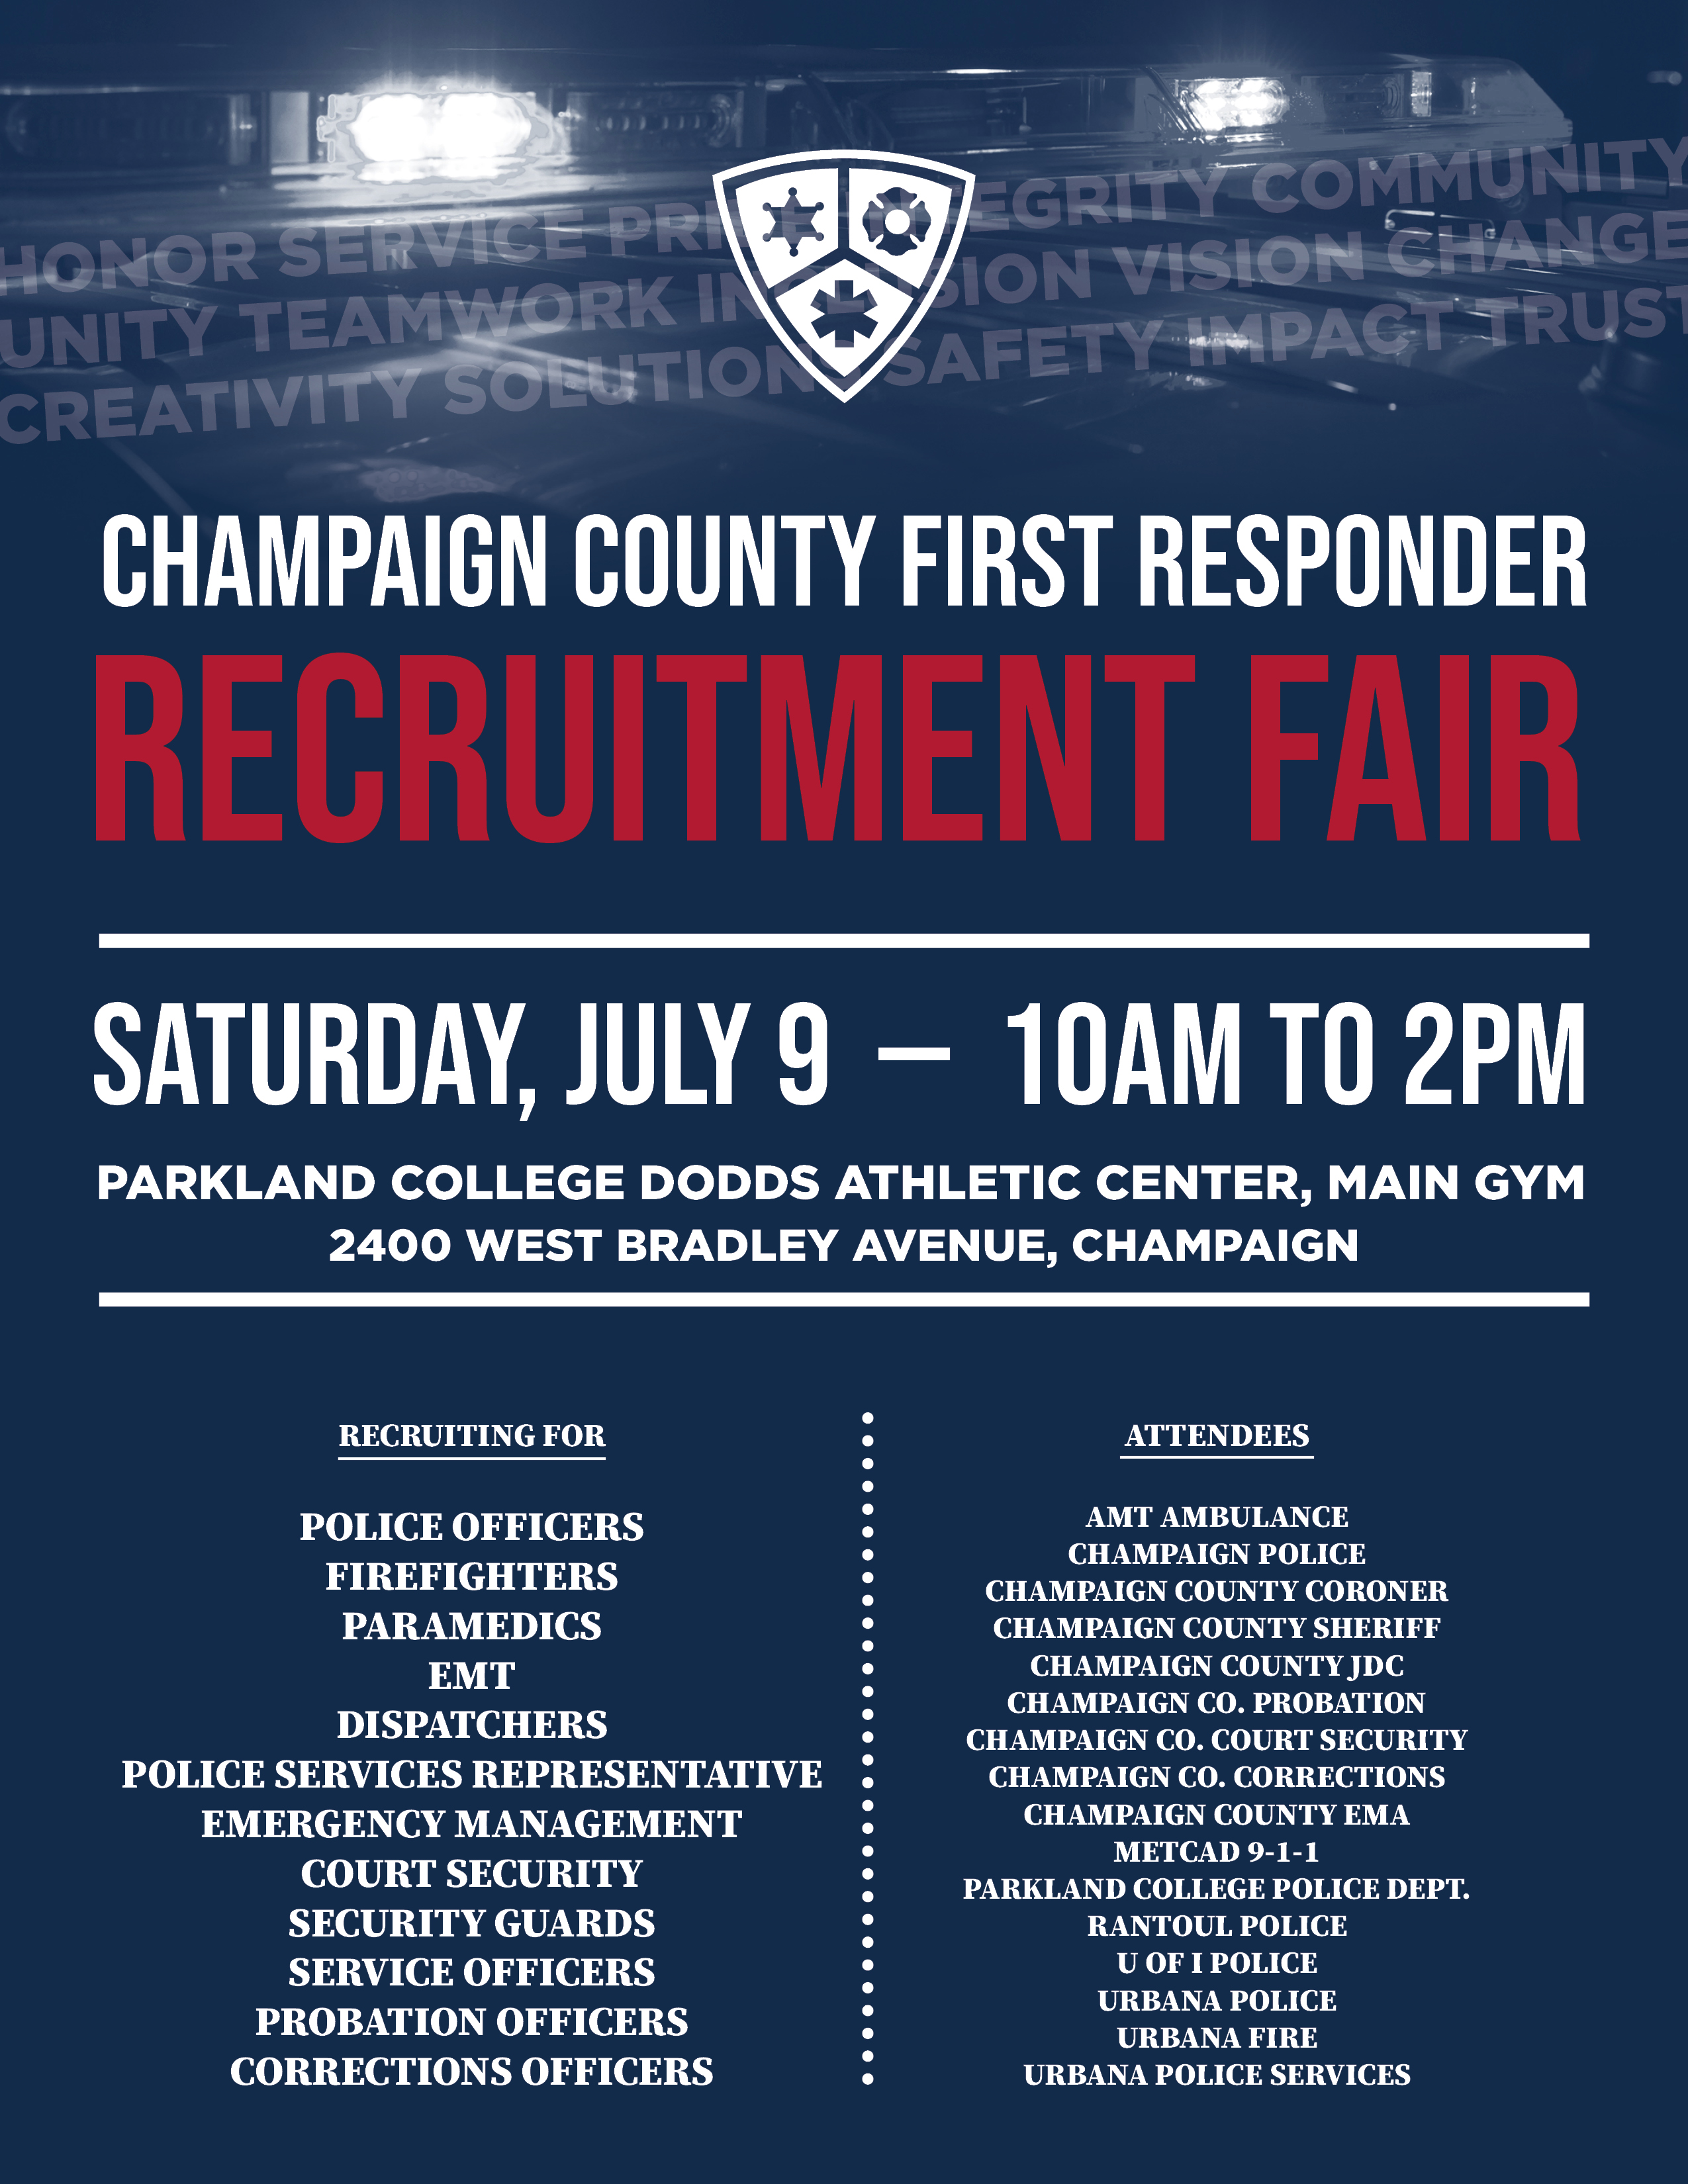 Champaign County First Responder Recruitment Fair Saturday July 9th from 10 am to 2 pm at the Parkland College Dodds Athletic Center Main gym